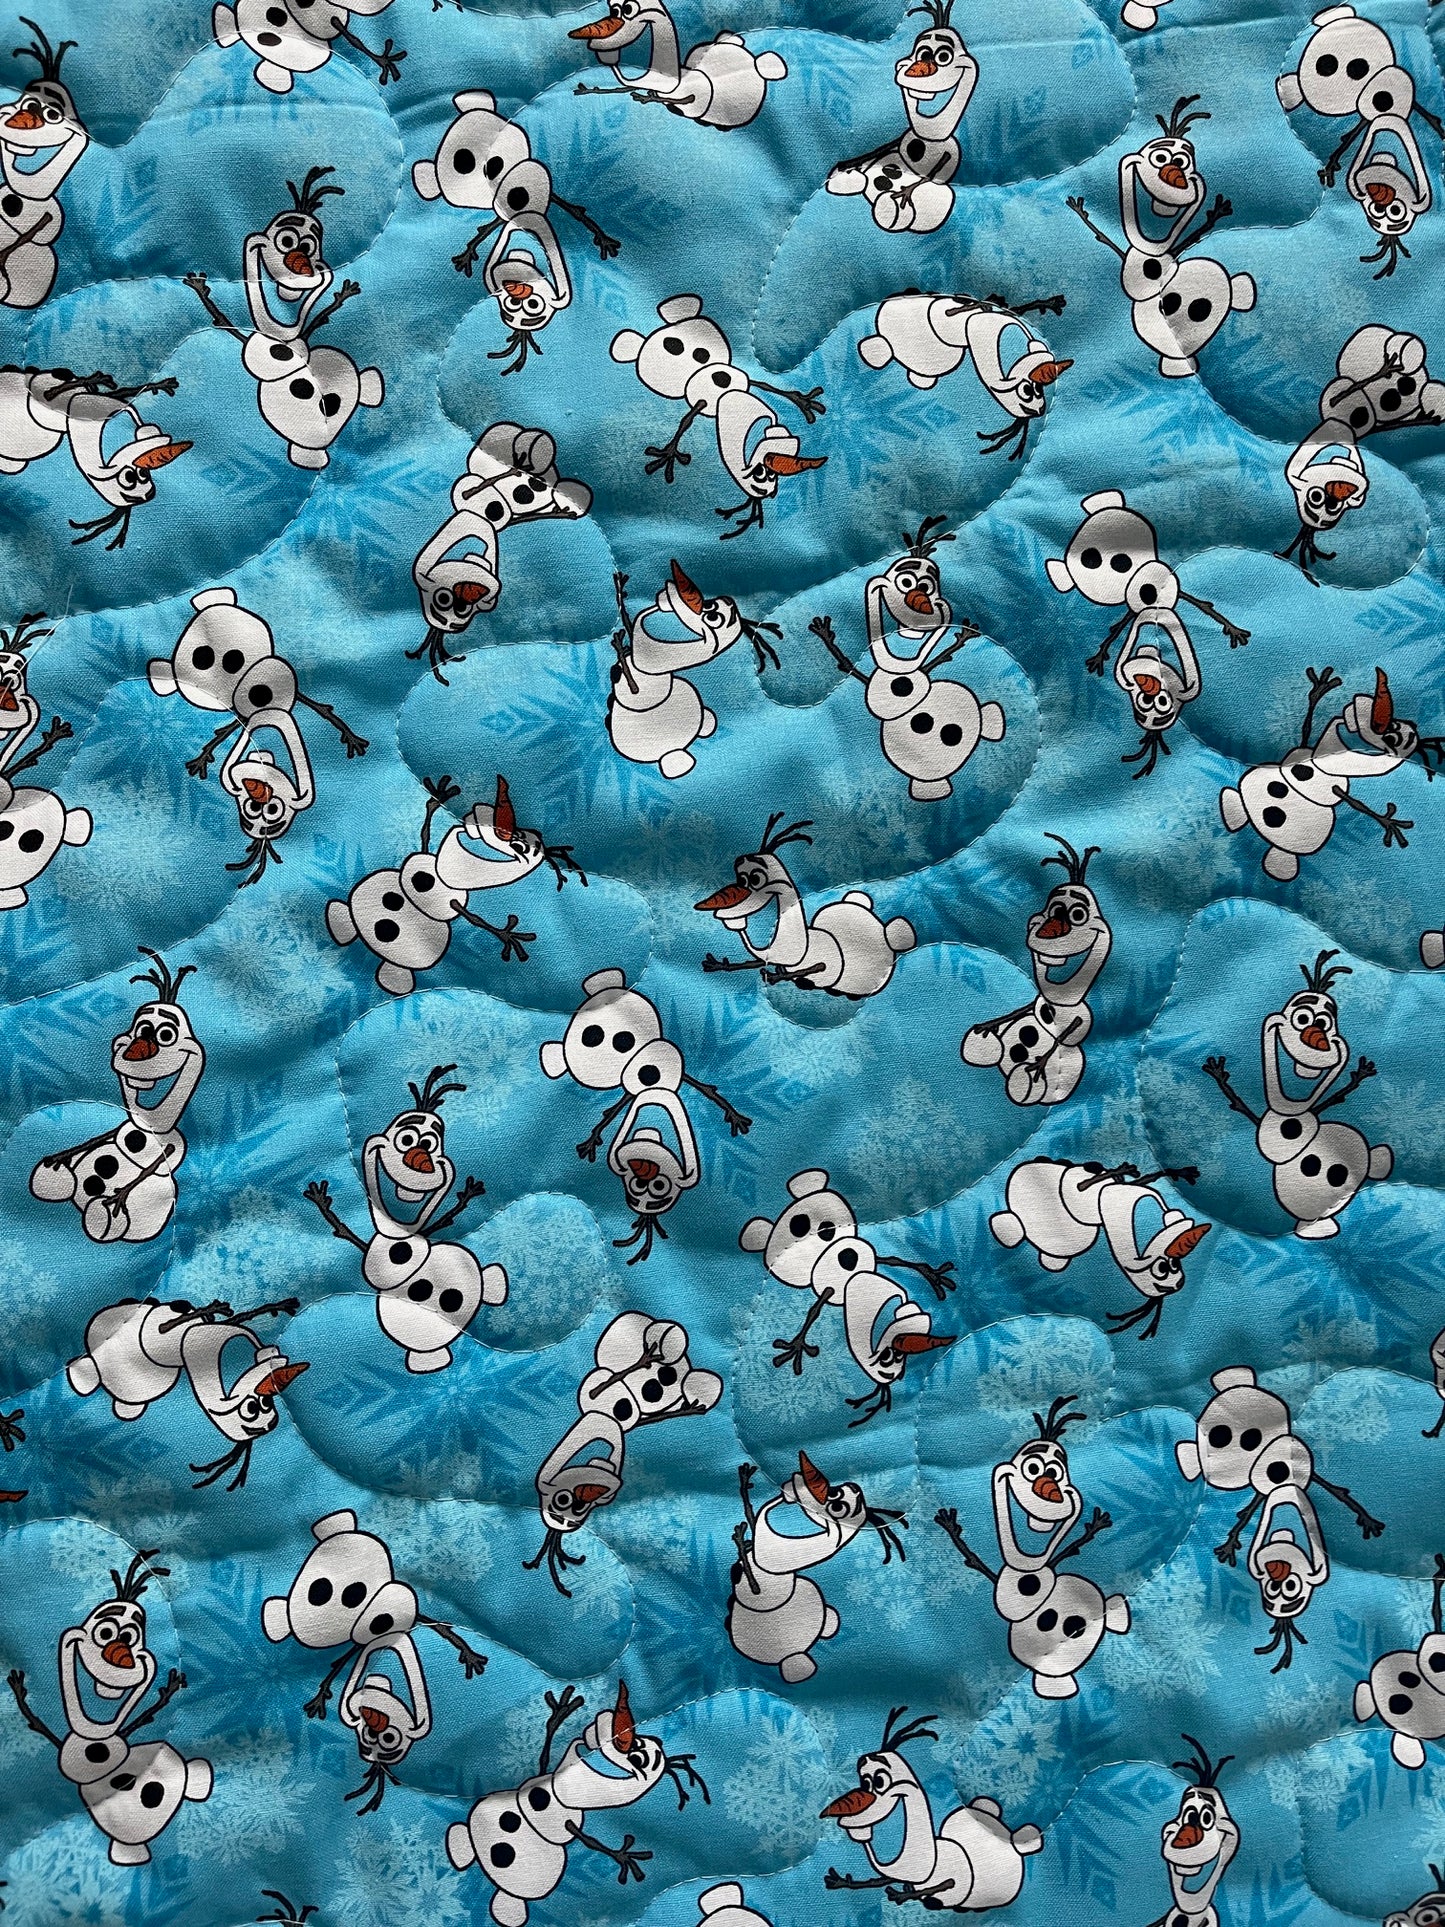 OLAF FROZEN INSPIRED QUILTED BLANKET 100% Cotton